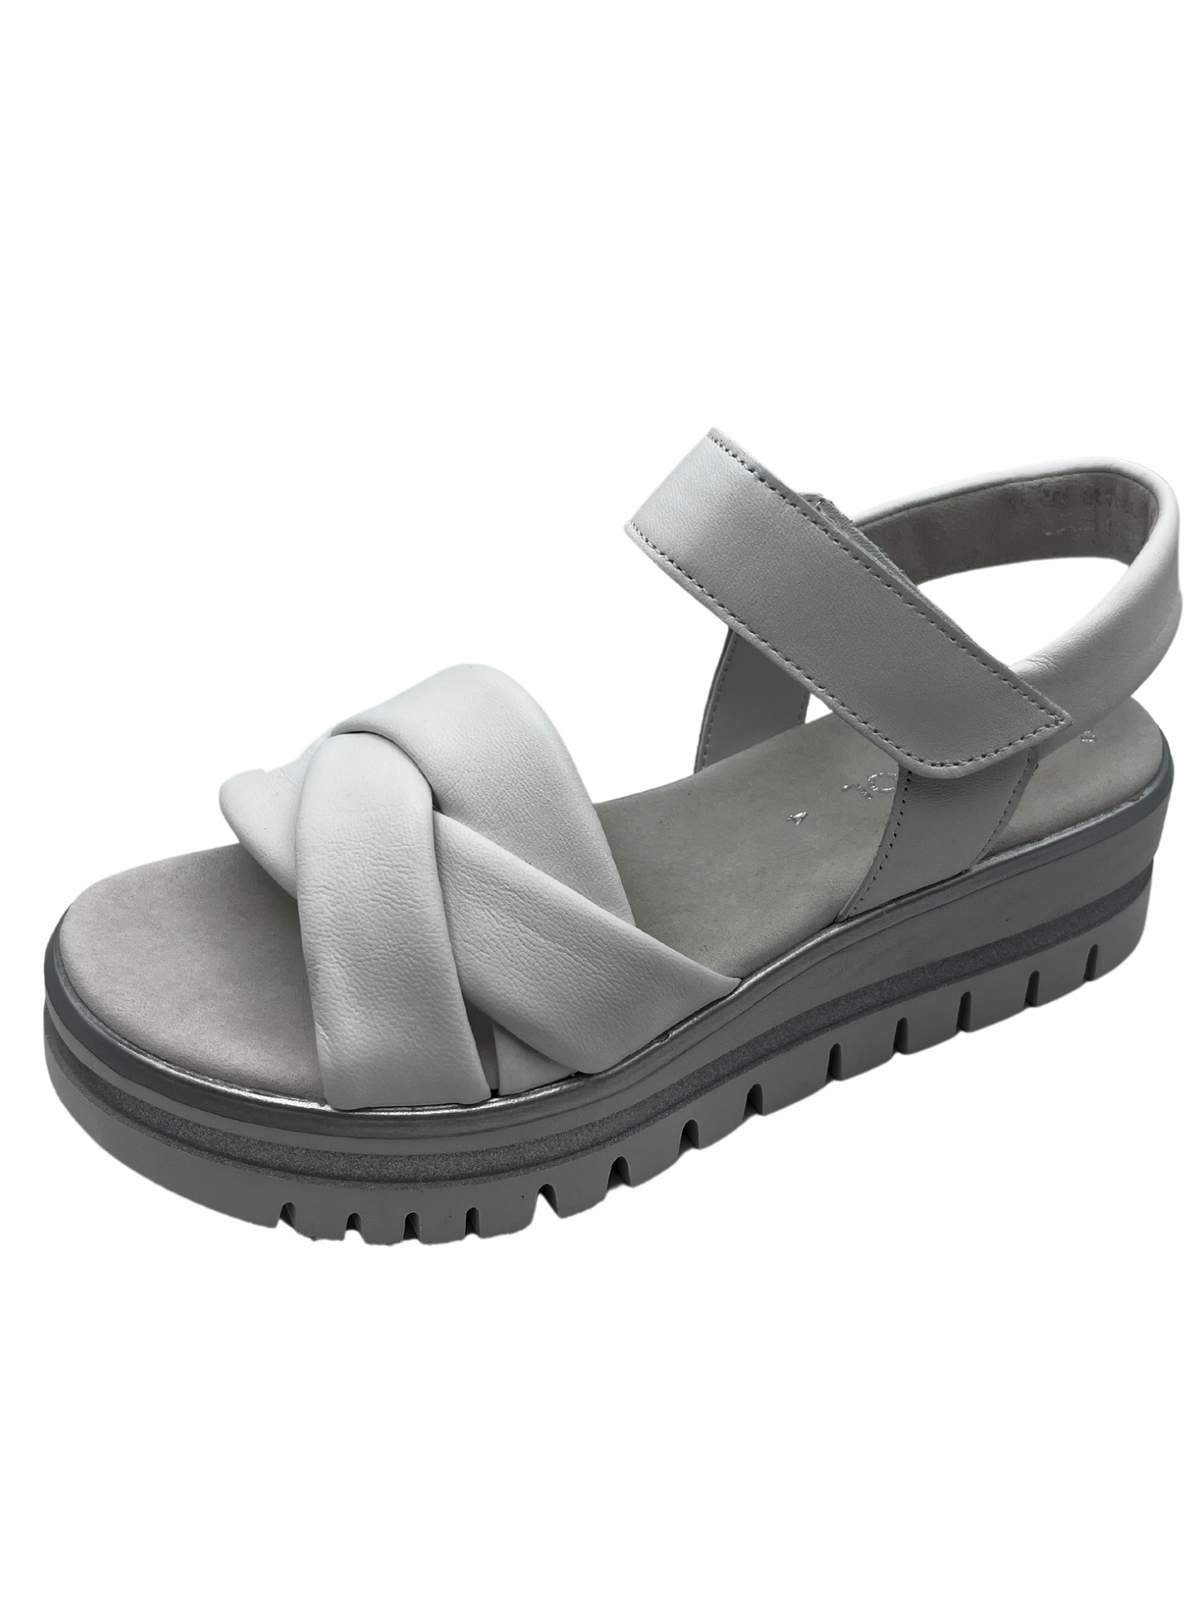 Gabor White Wedge CrossOver Leather Sandals